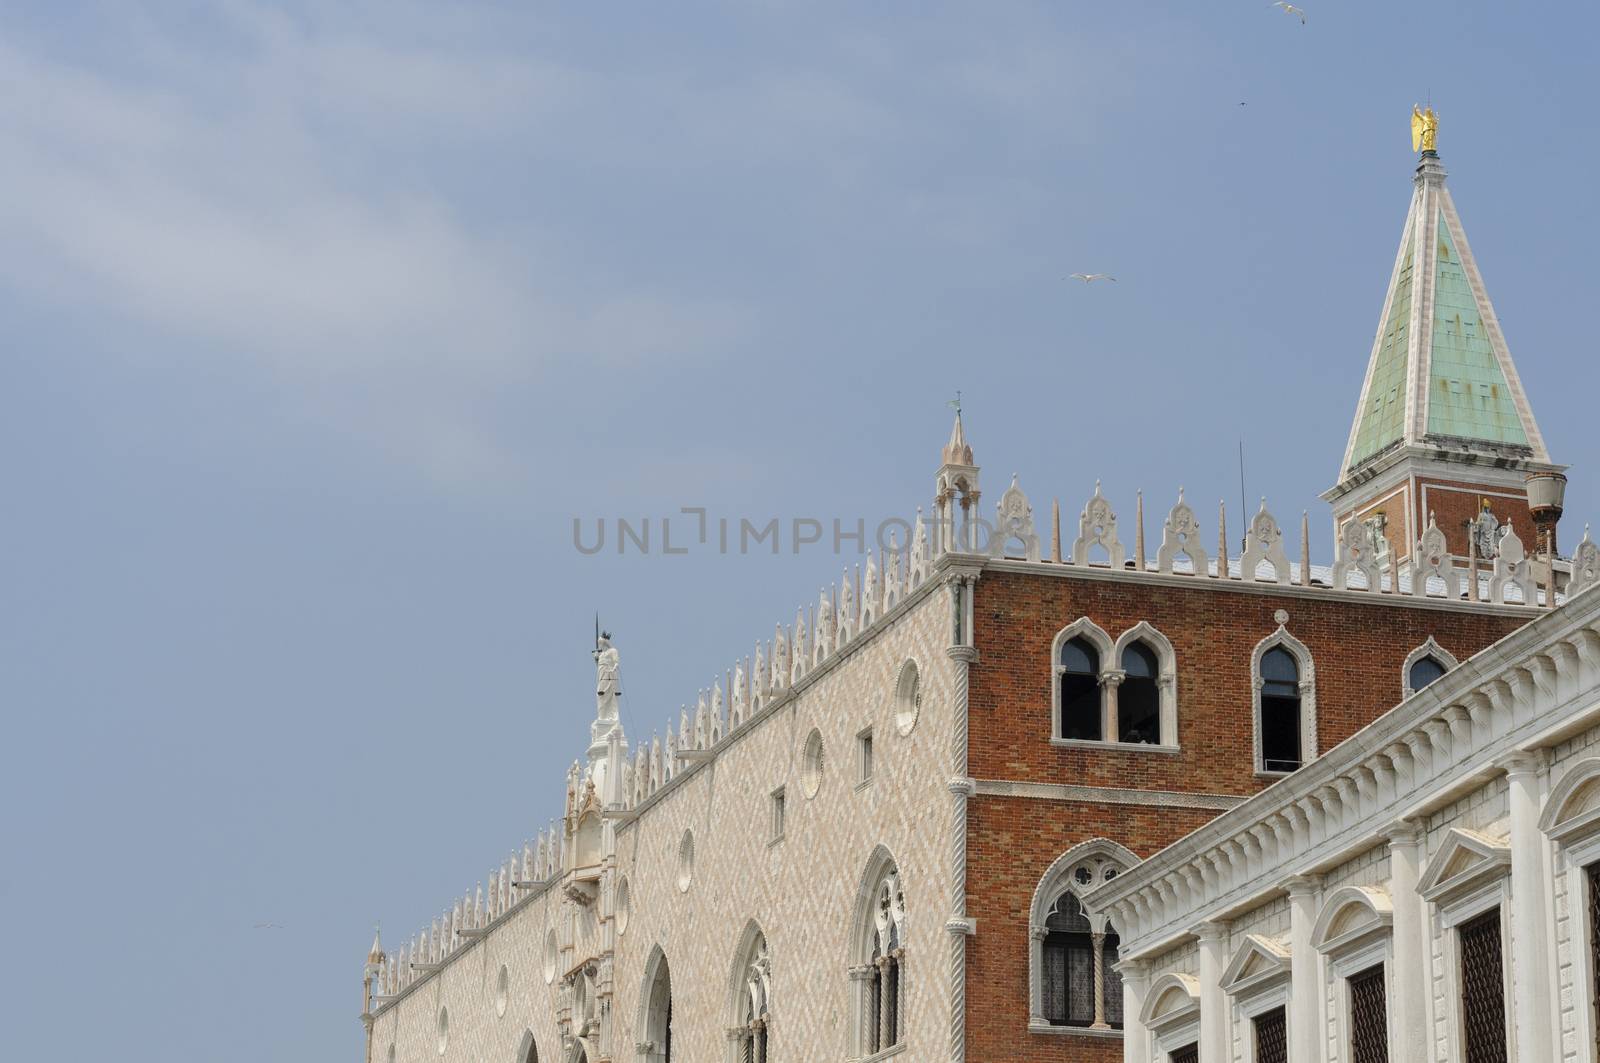 View of the facade and the roof of the Doge's Palace, one of the most famous landmarks of Venice, Veneto, Italy, Europe